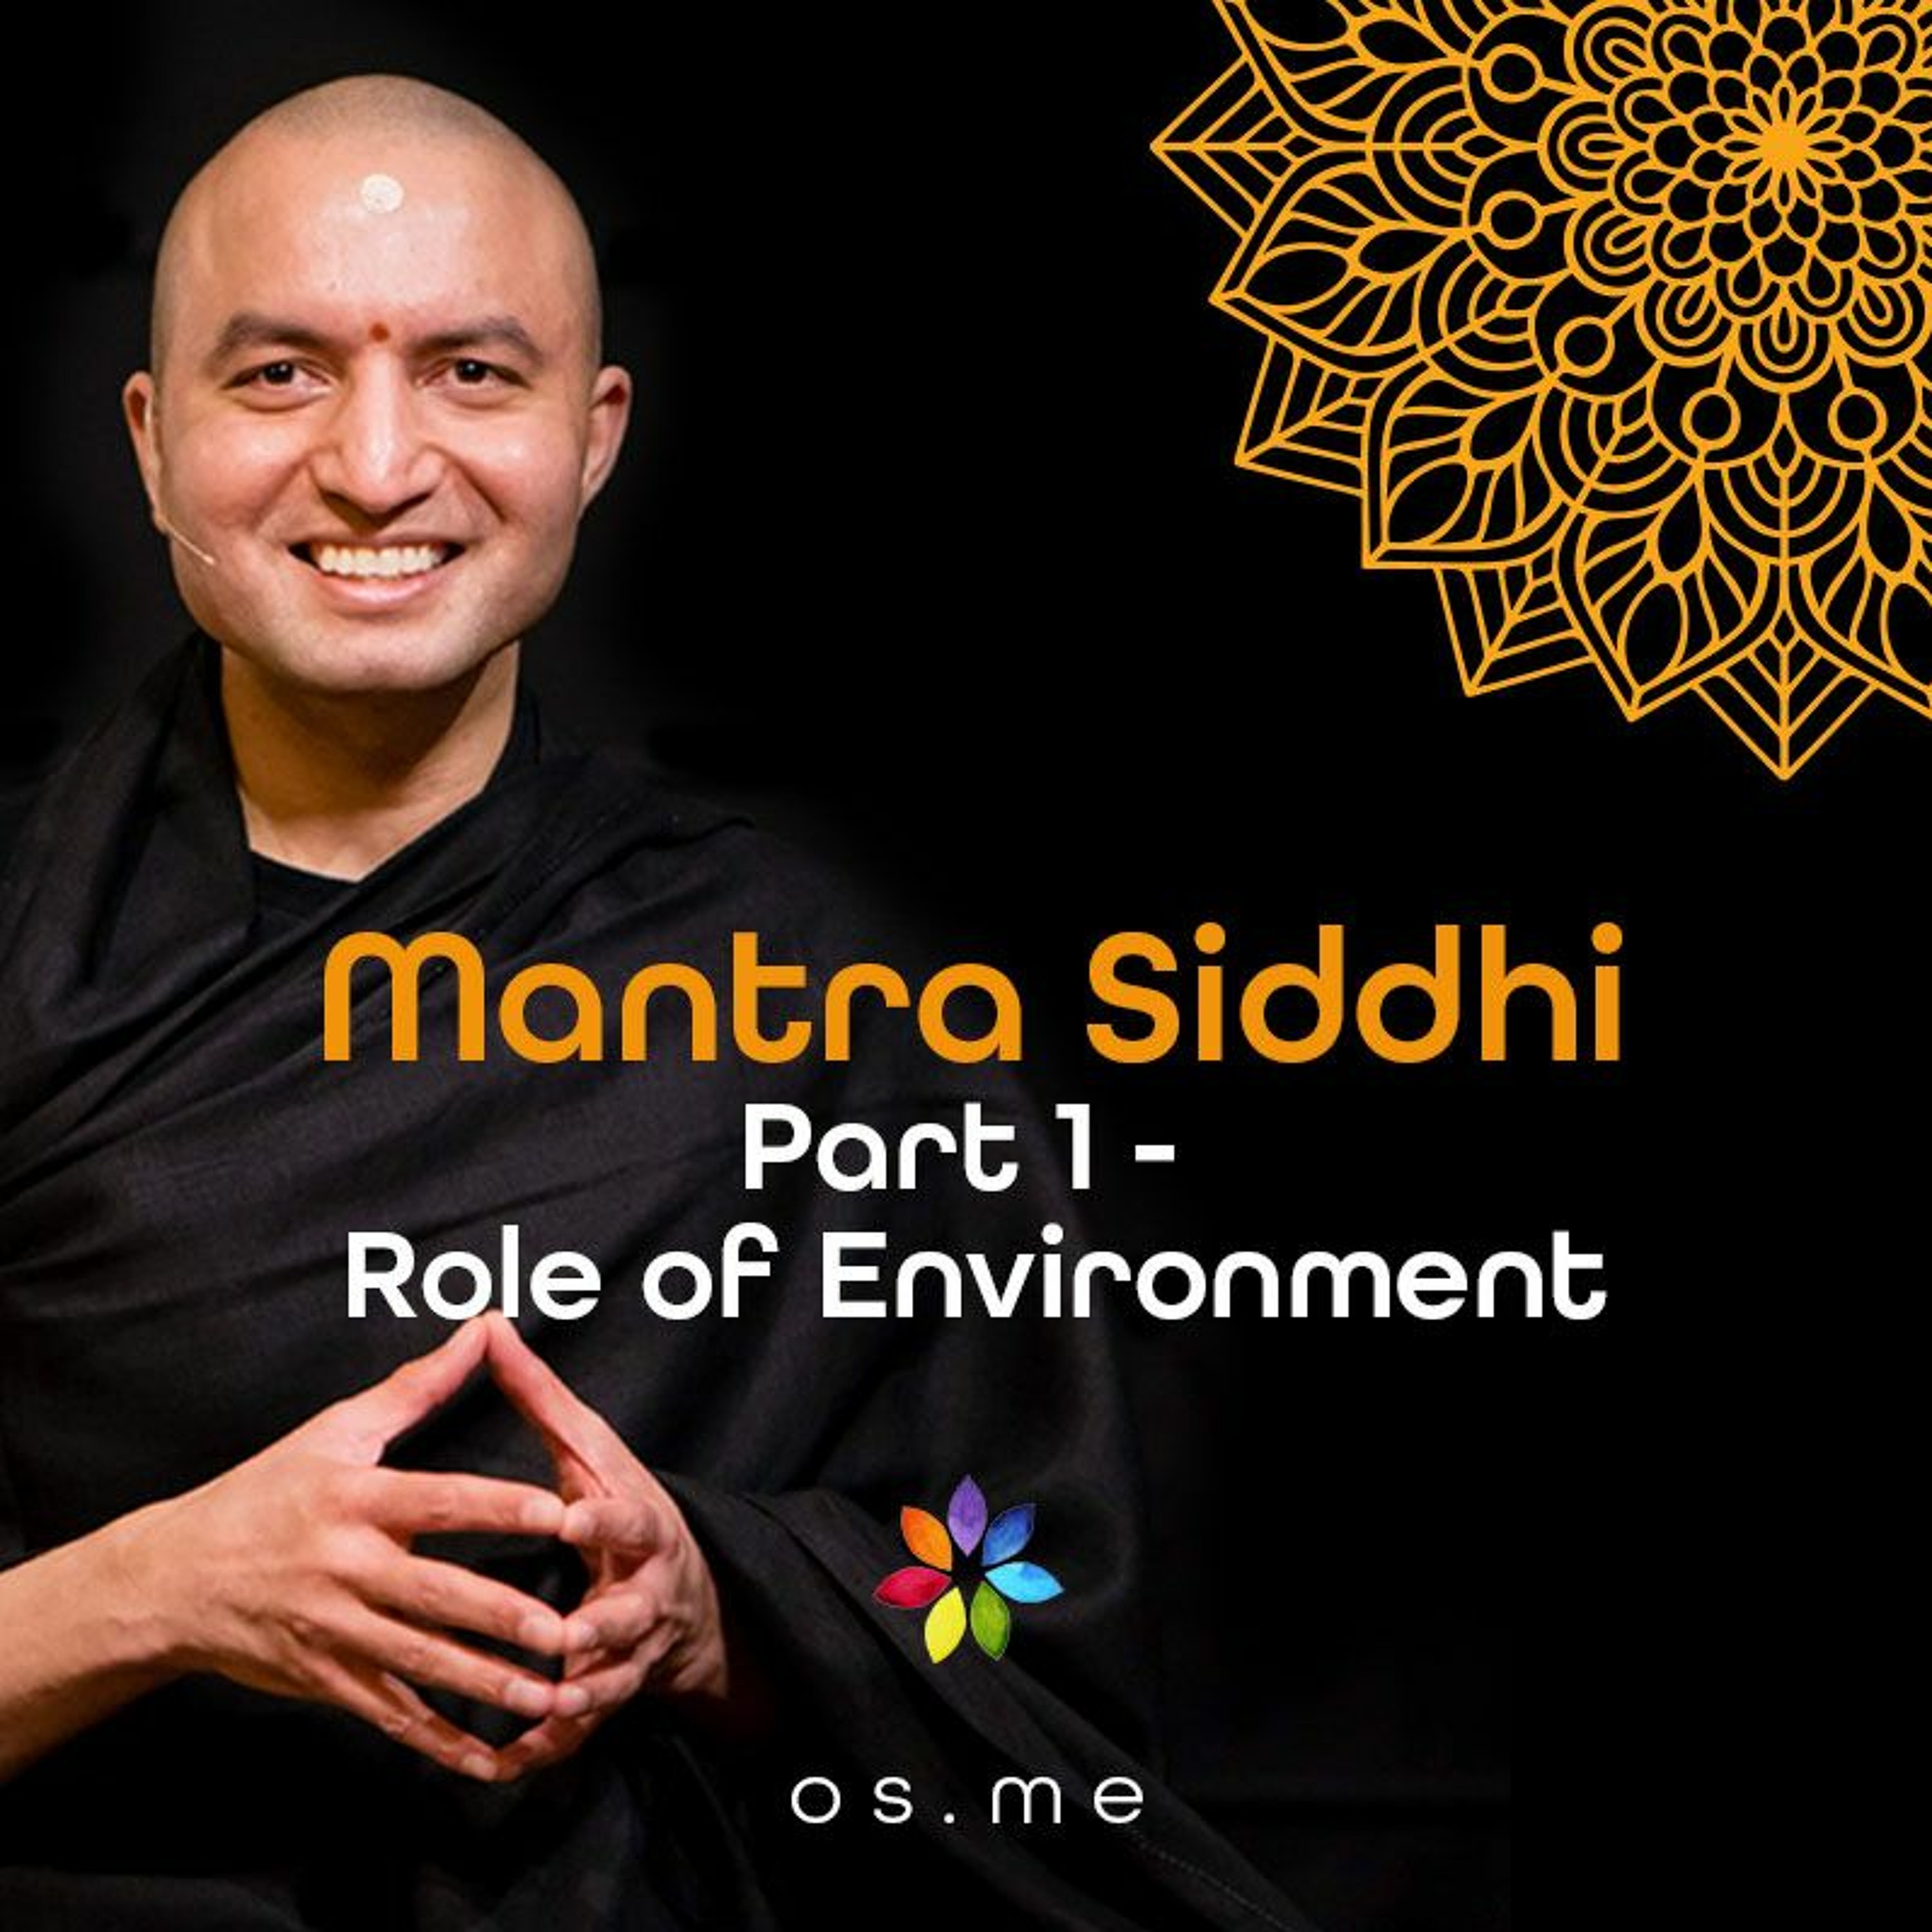 Mantra Siddhi Part 1 - Role Of Environment [Hindi]